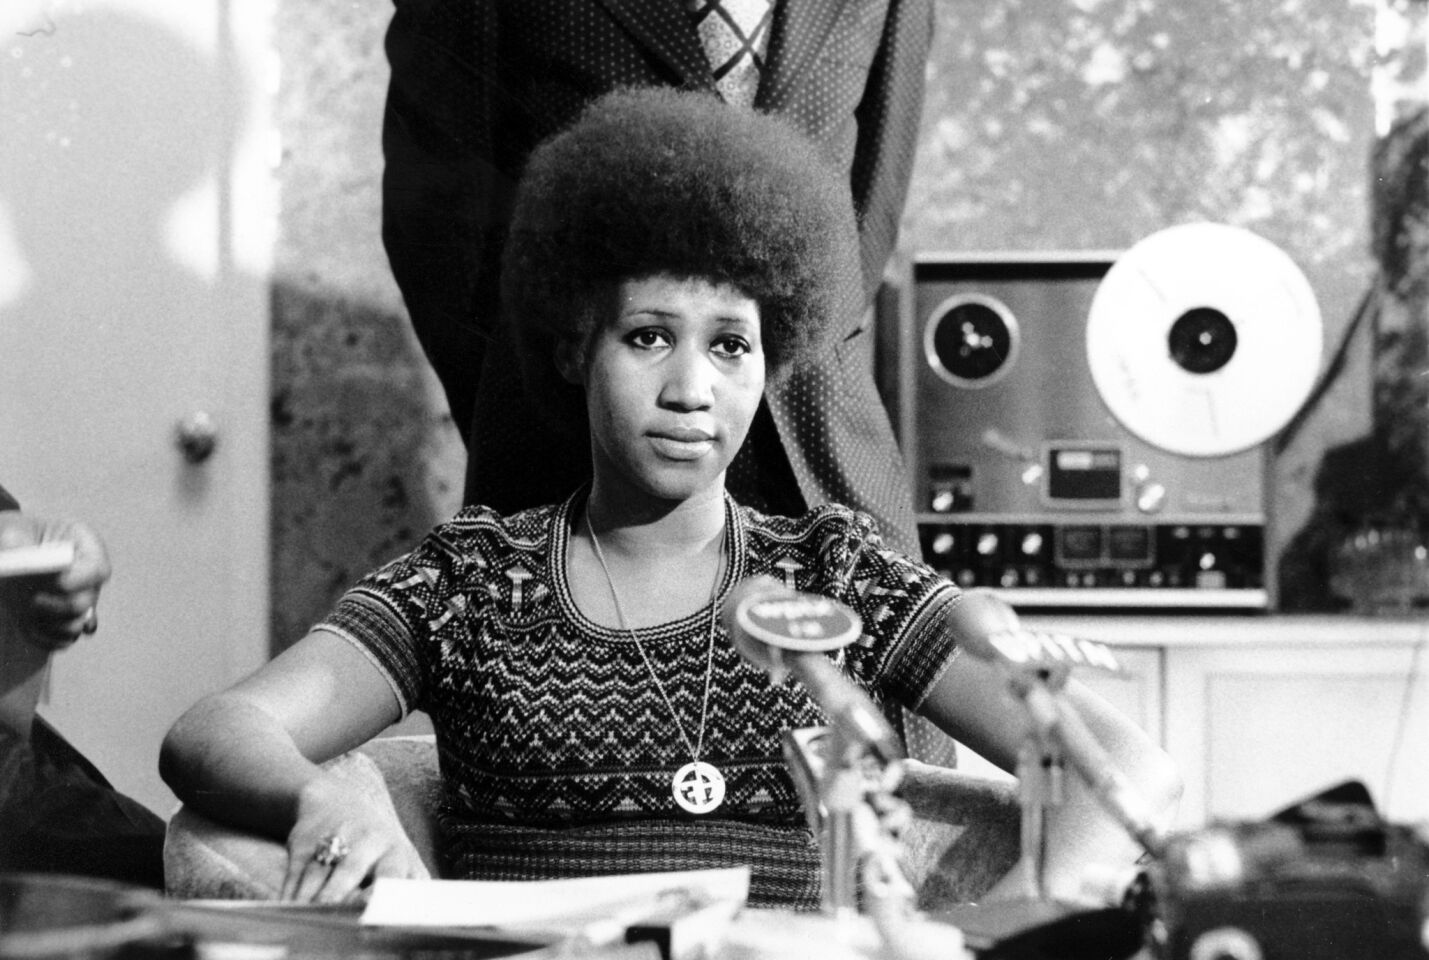 Known as the Queen of Soul, Aretha Franklin was nominated for 44 Grammy Awards, and won 18. Her hits include “Respect,” “(You Make Me Feel Like) A Natural Woman,” “I Say A Little Prayer” and “Chain of Fools.” She was 76.